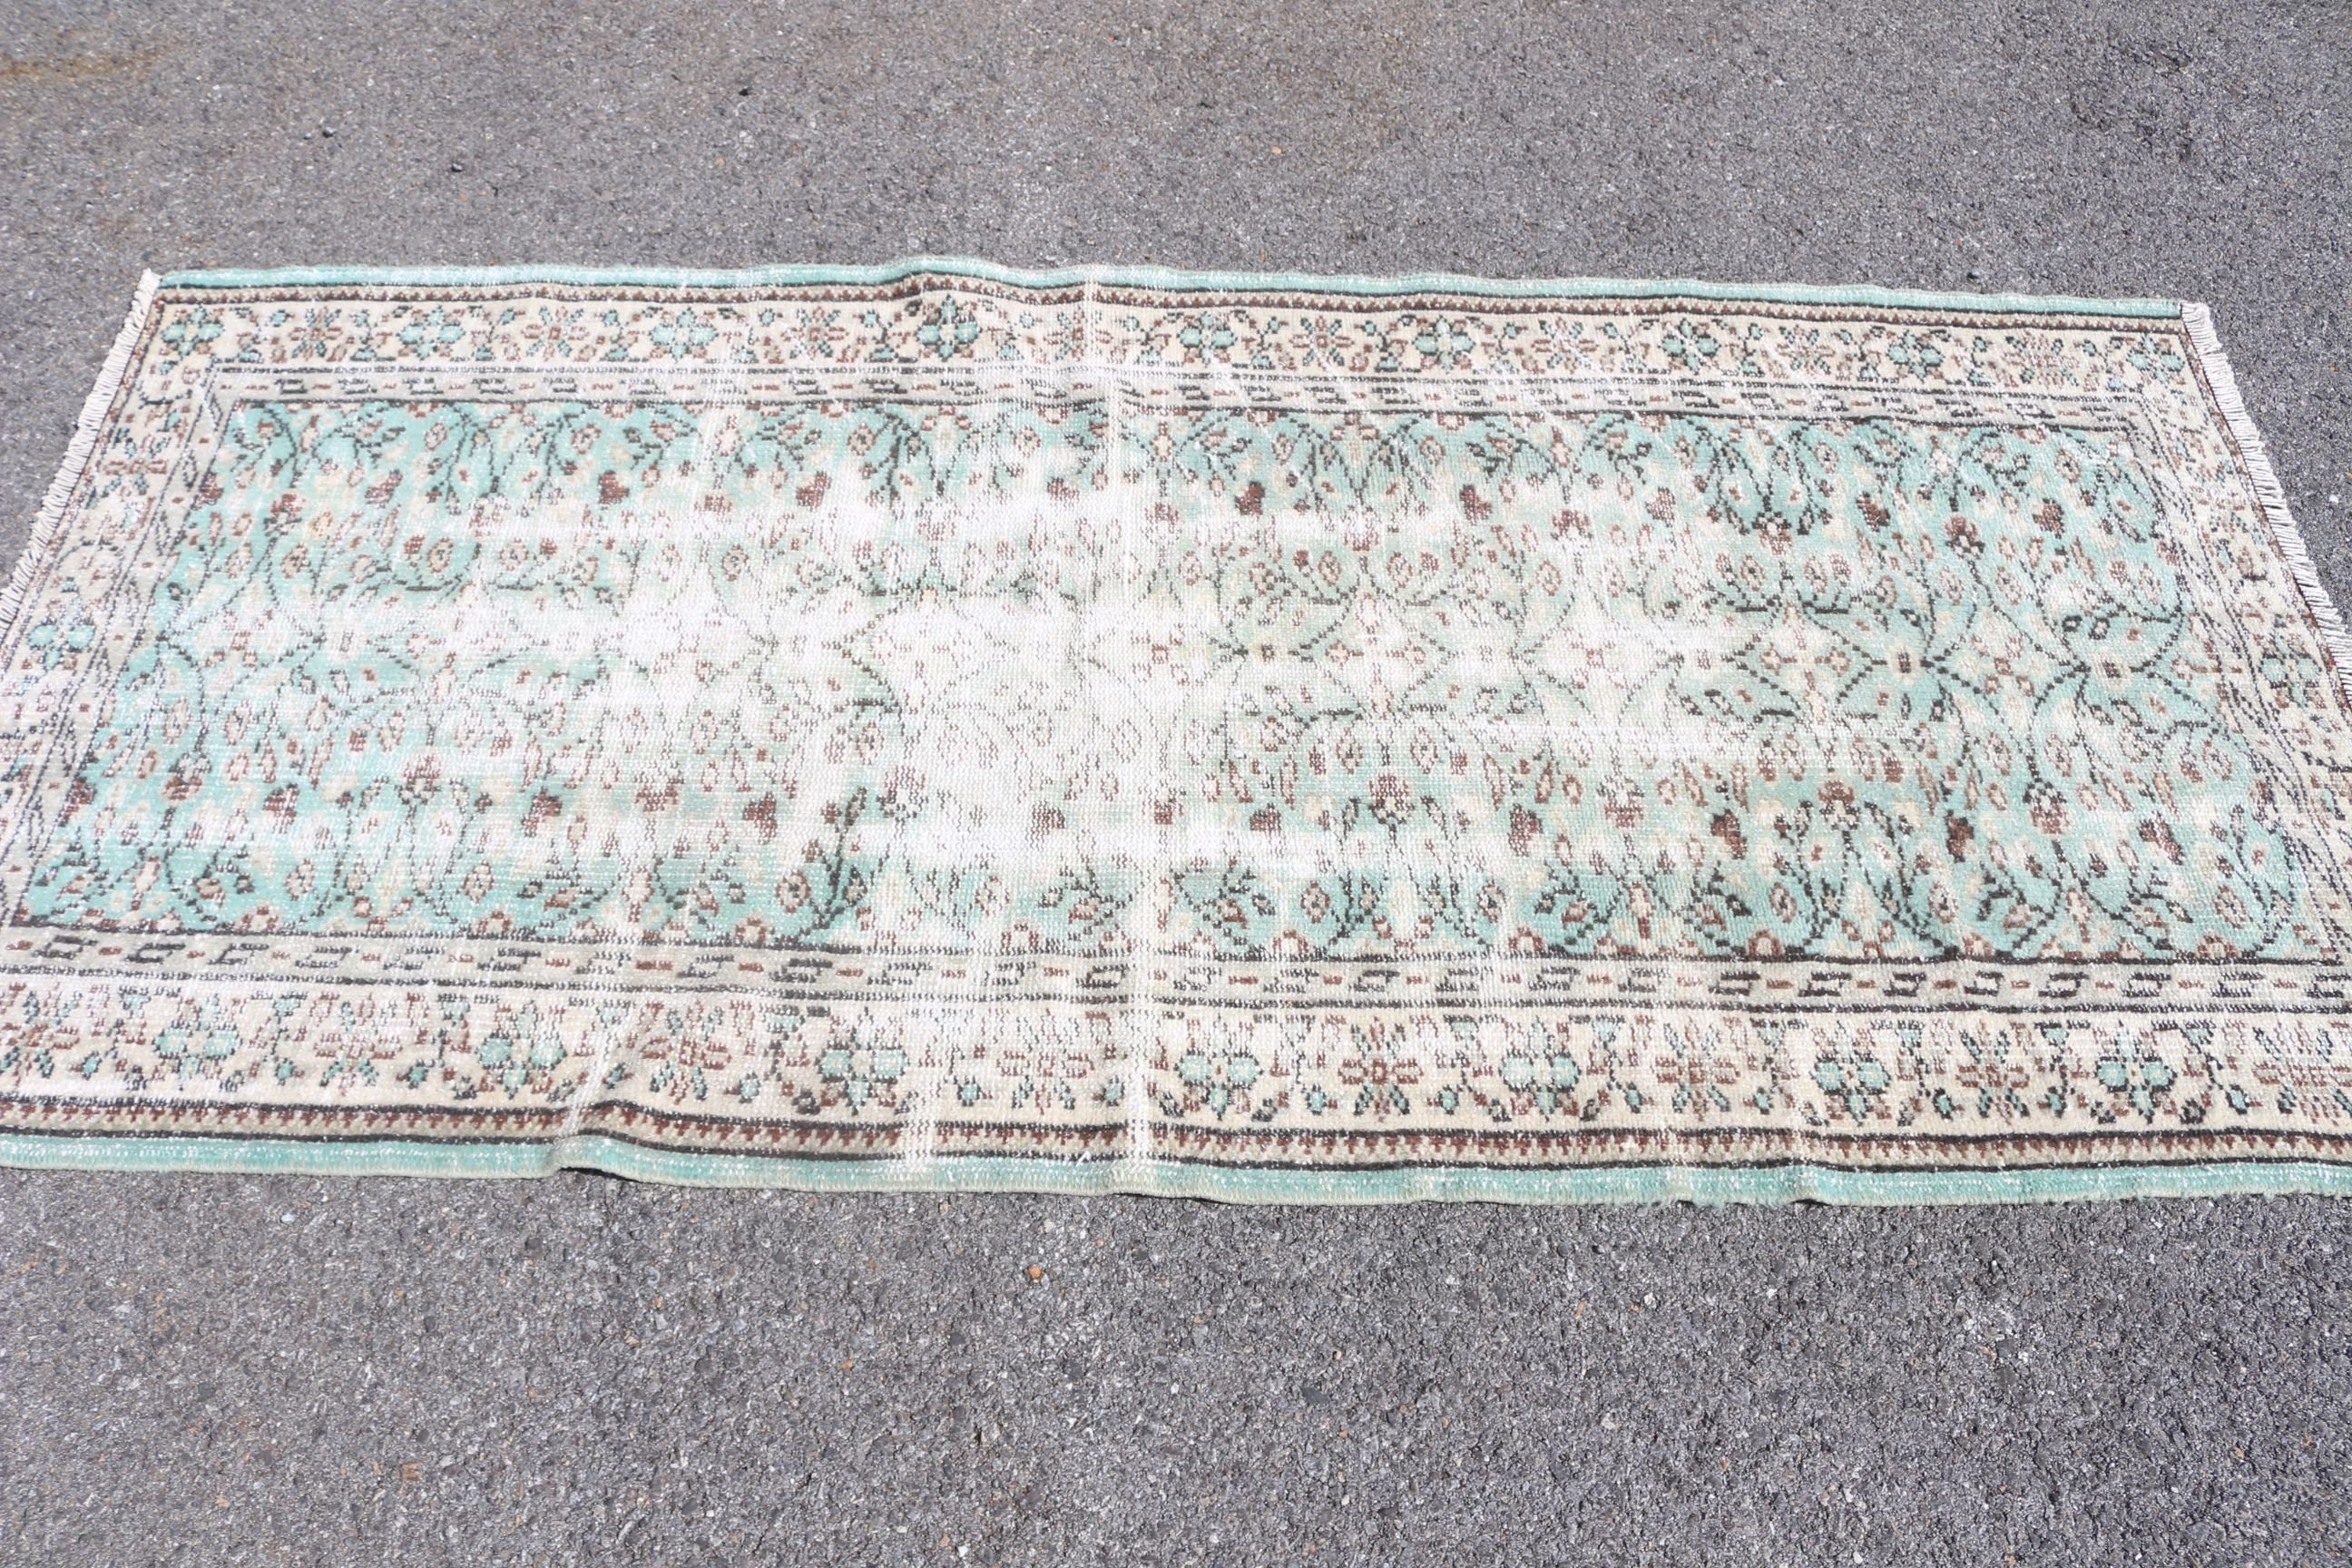 Entry Rug, Turkish Rugs, Nursery Rug, Beige Home Decor Rugs, Kitchen Rug, Bohemian Rug, Vintage Rug, Antique Rugs, 3.1x6.6 ft Accent Rugs